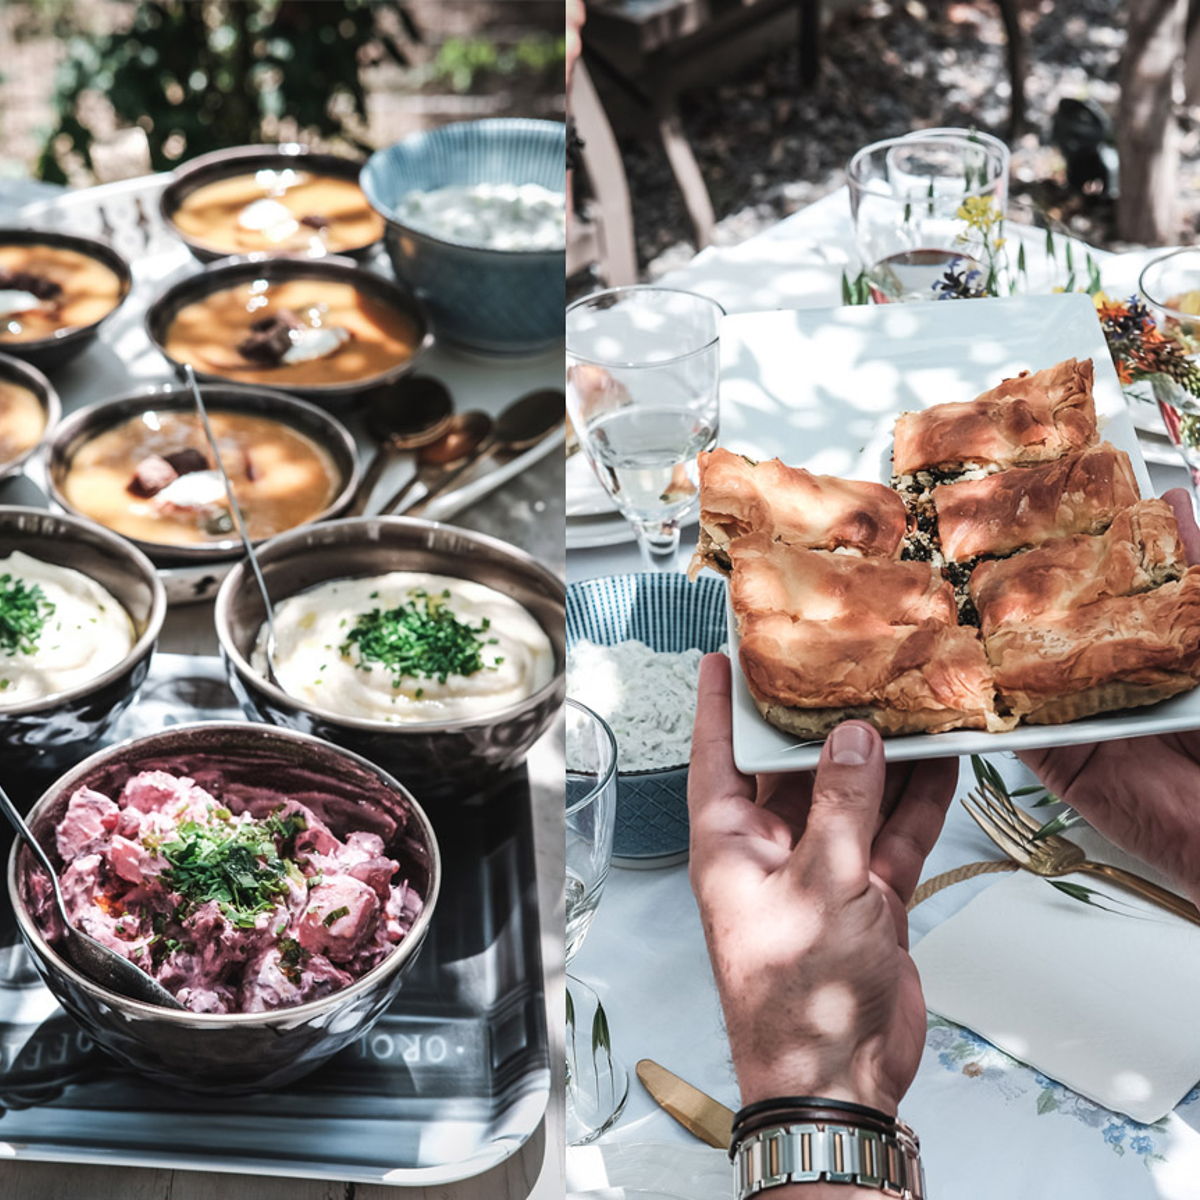 Greek lunch under the trees in a private garden in Athens